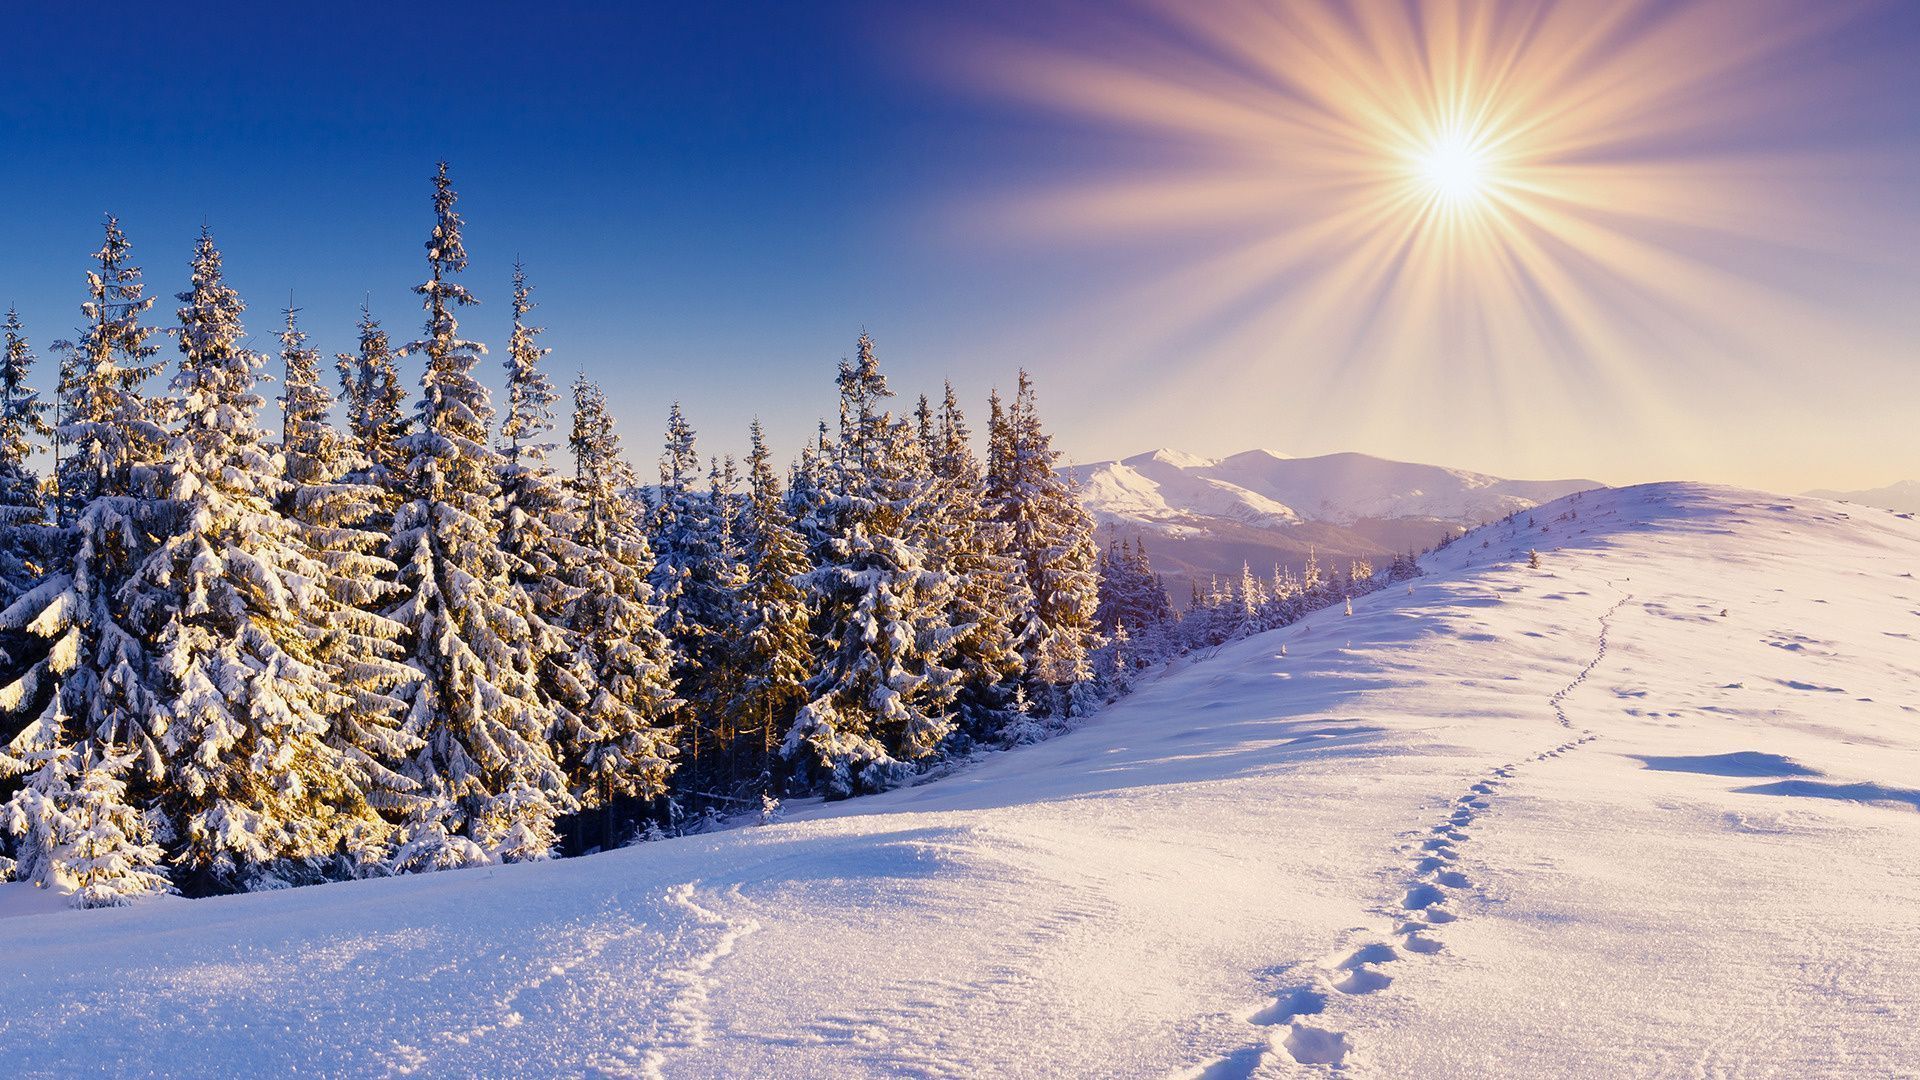 Mountain winter forest wallpapers and images - wallpapers